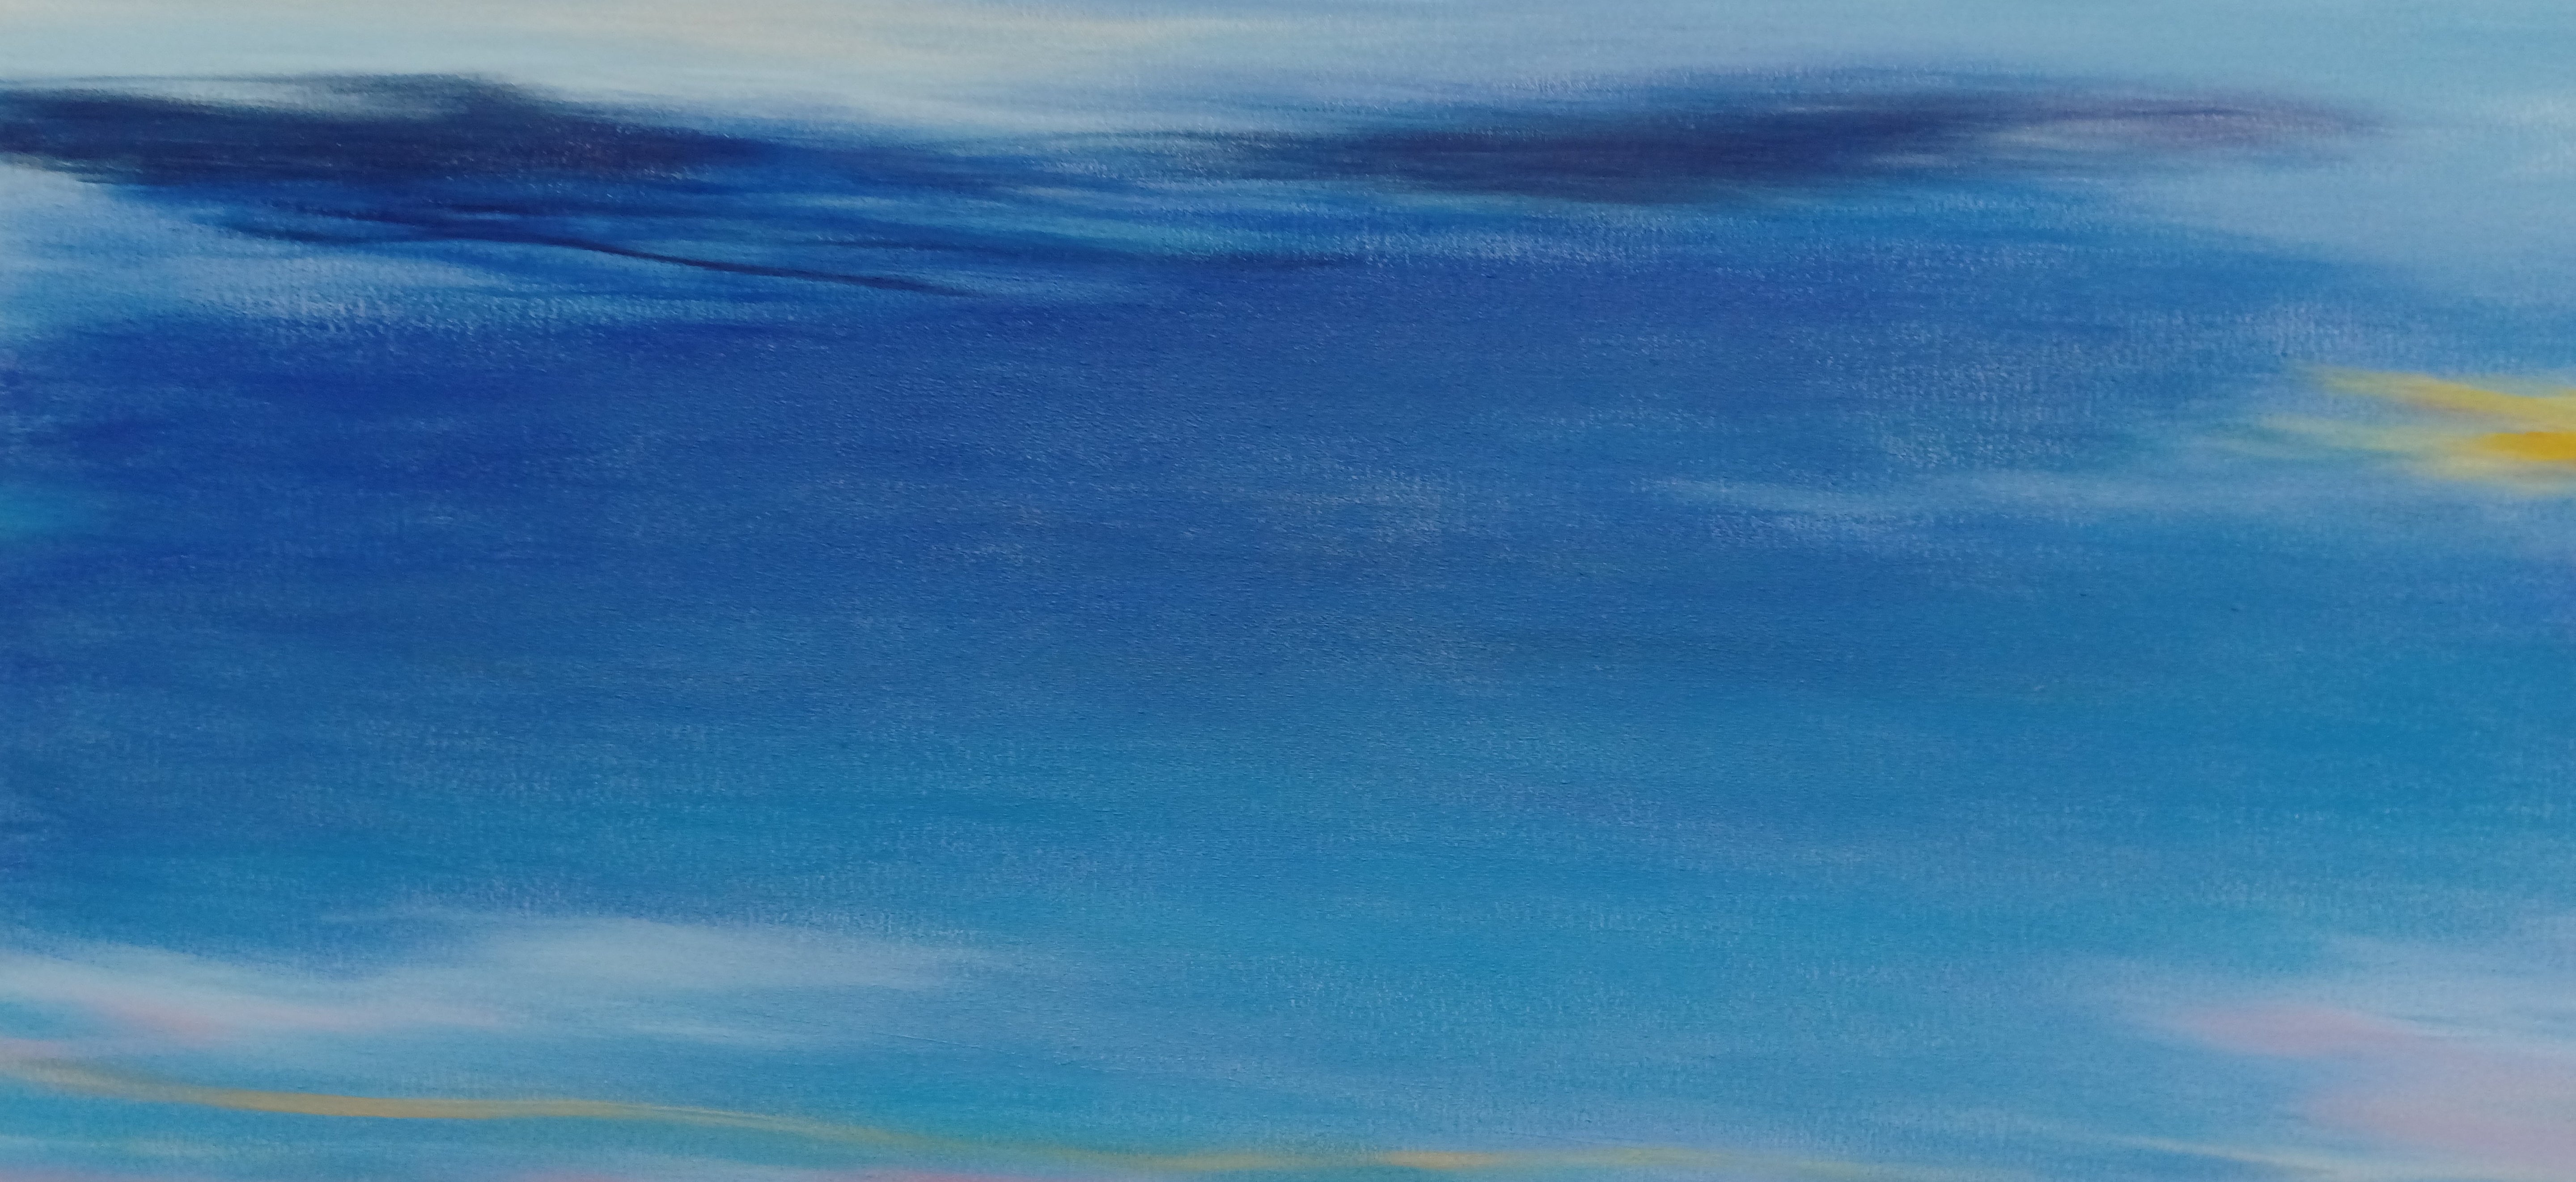 'WAVES #60' - Oil on Canvas